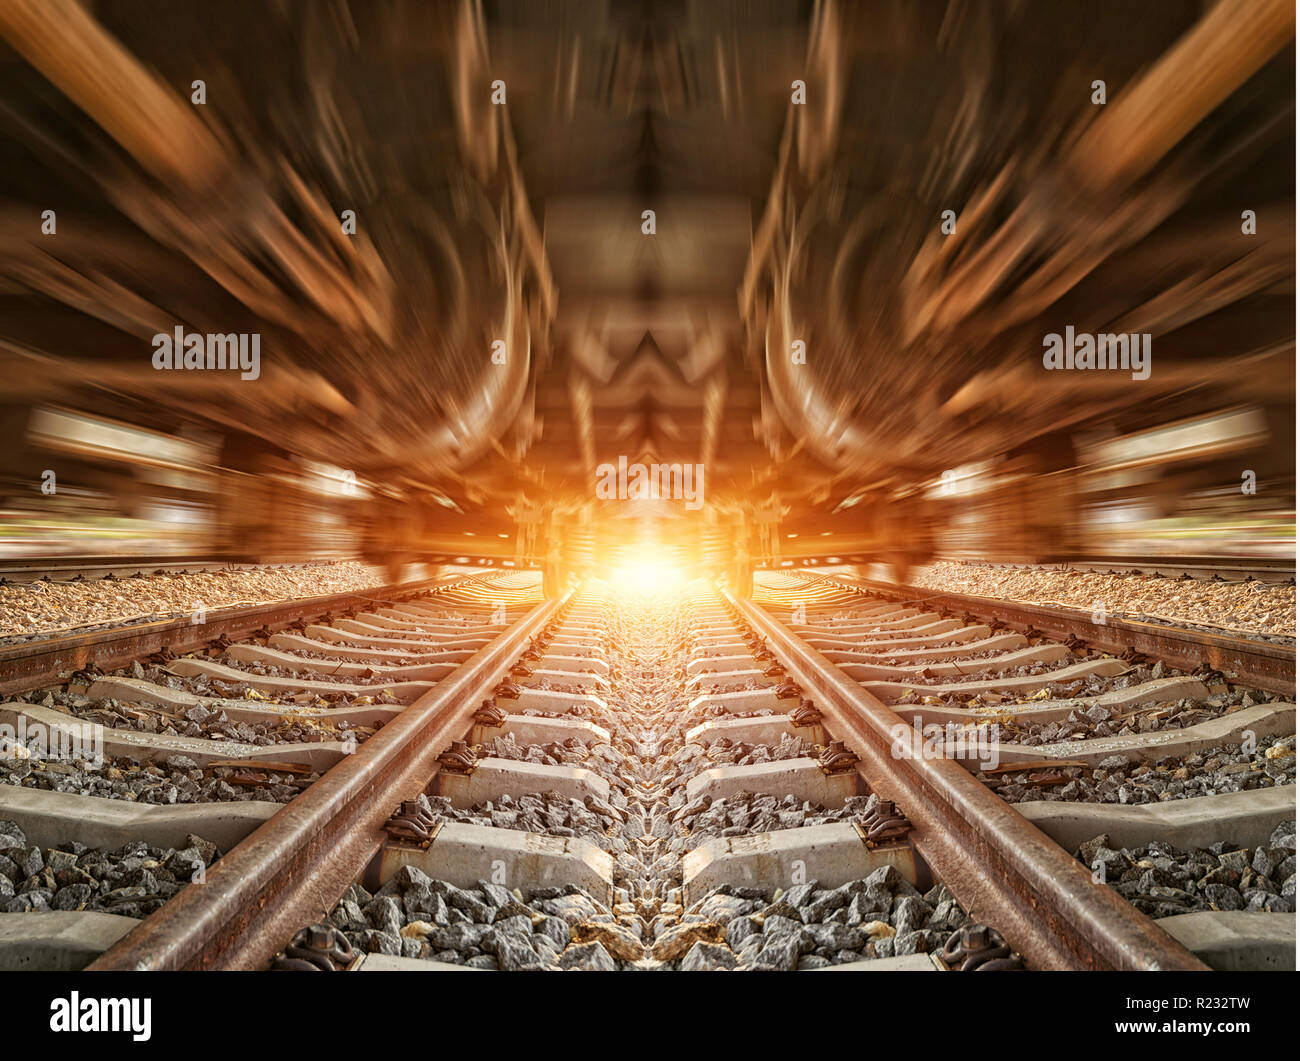 Cargo train platform at sunset with container Stock Photo